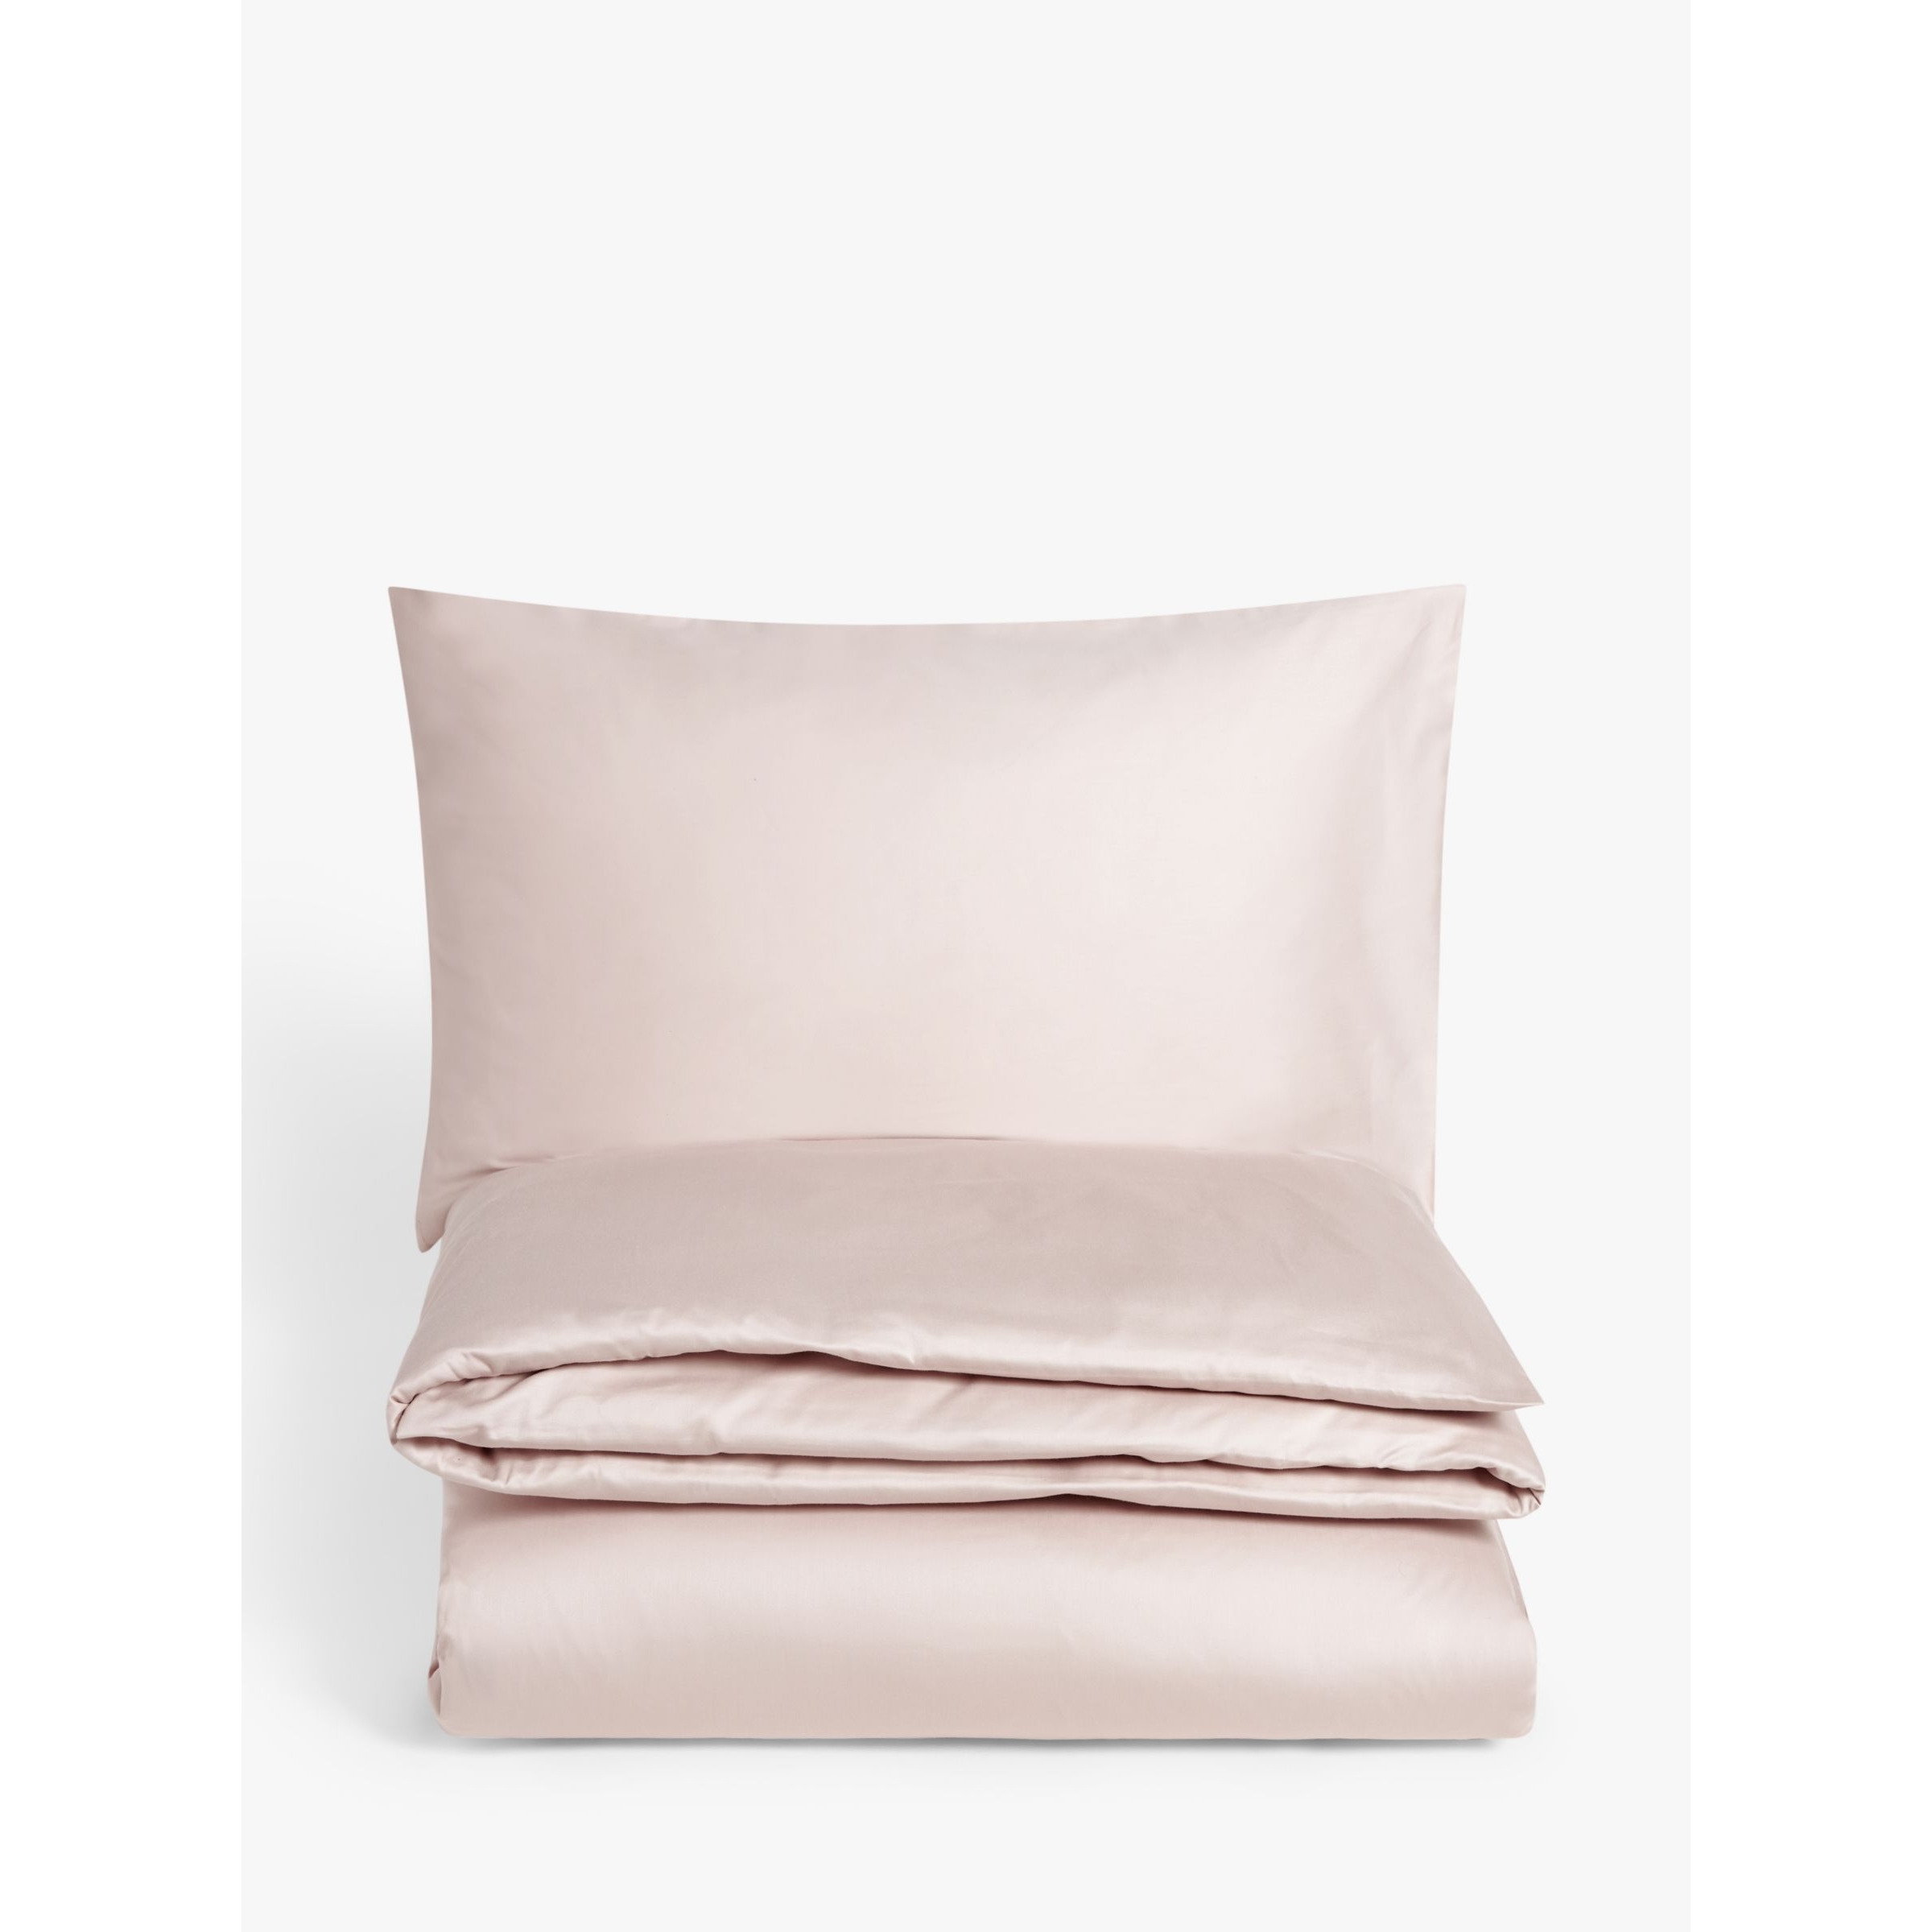 John Lewis Soft & Silky Specialist Temperature Balancing 400 Thread Count Cotton Bedding - image 1